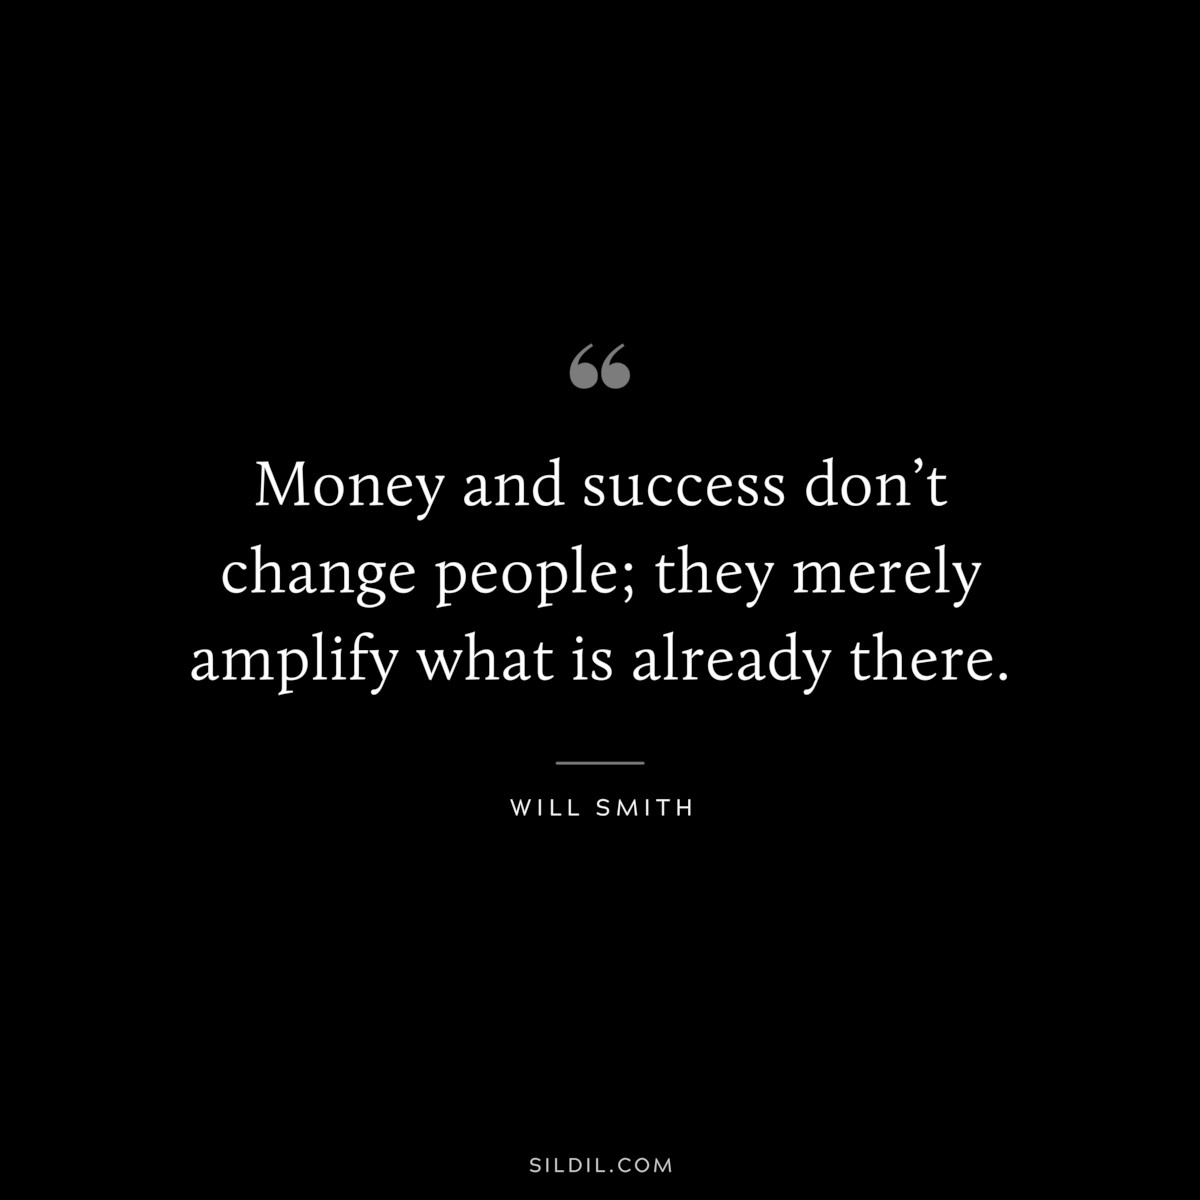 Money and success don’t change people; they merely amplify what is already there. ― Will Smith